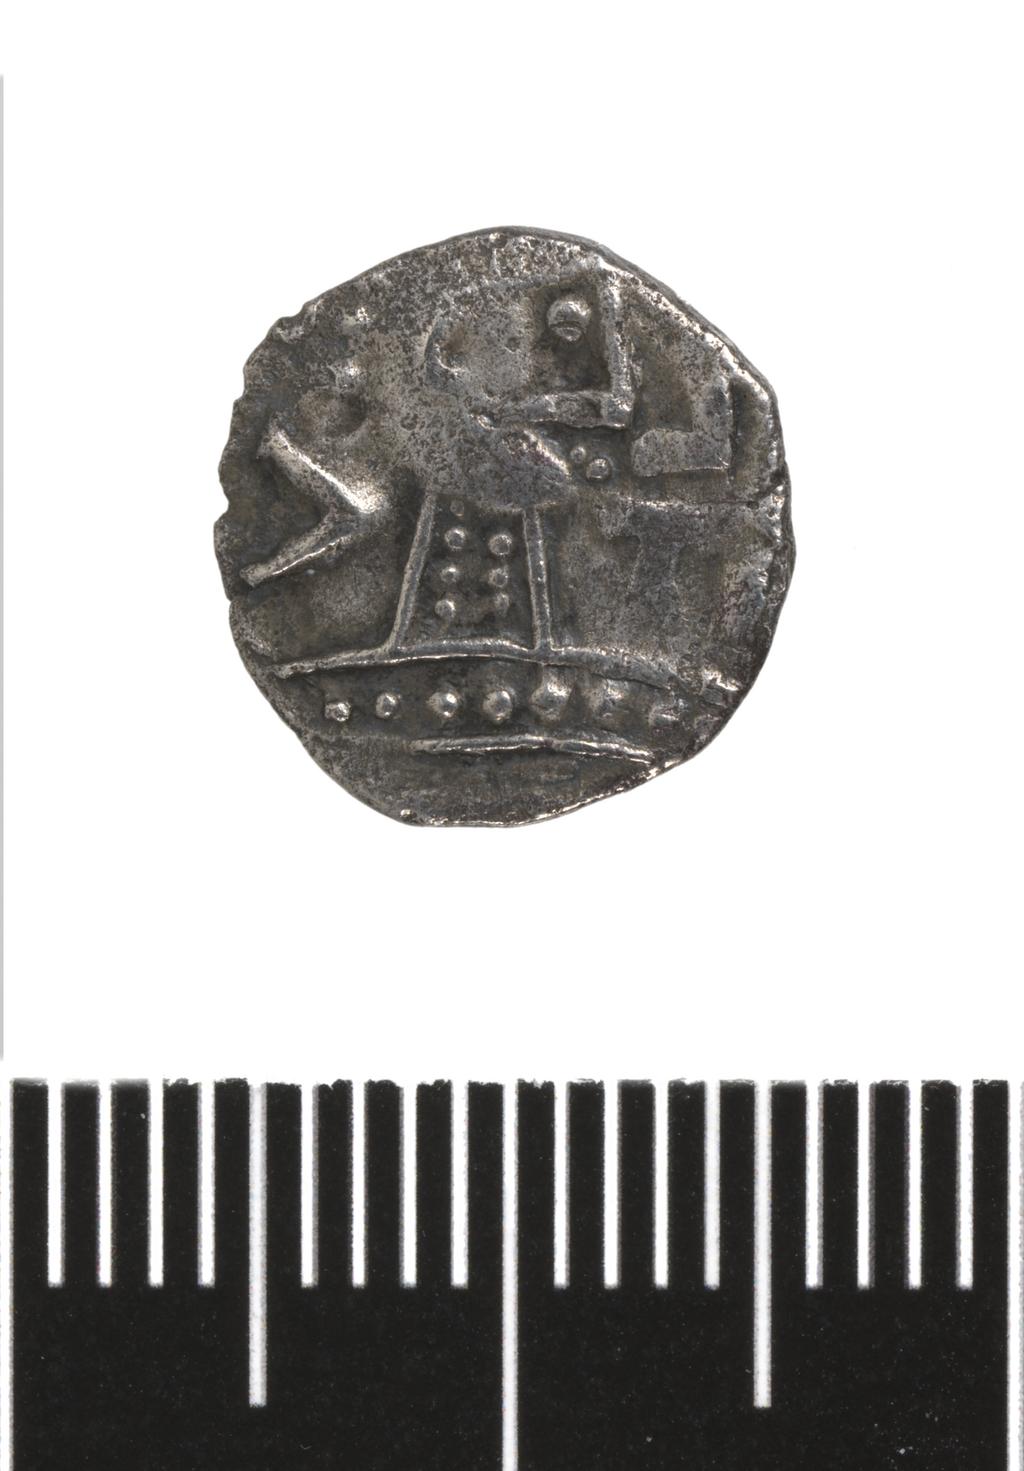 An image of Coinage. Penny. Production Place: England. Radiate Bust/Porcupine-face. Type 10 Series D/E. Silver, struck, weight 1.13 g, width 11.83 mm, height 11.58 mm, 700-750. Anglo-Saxon. Early Medieval European.